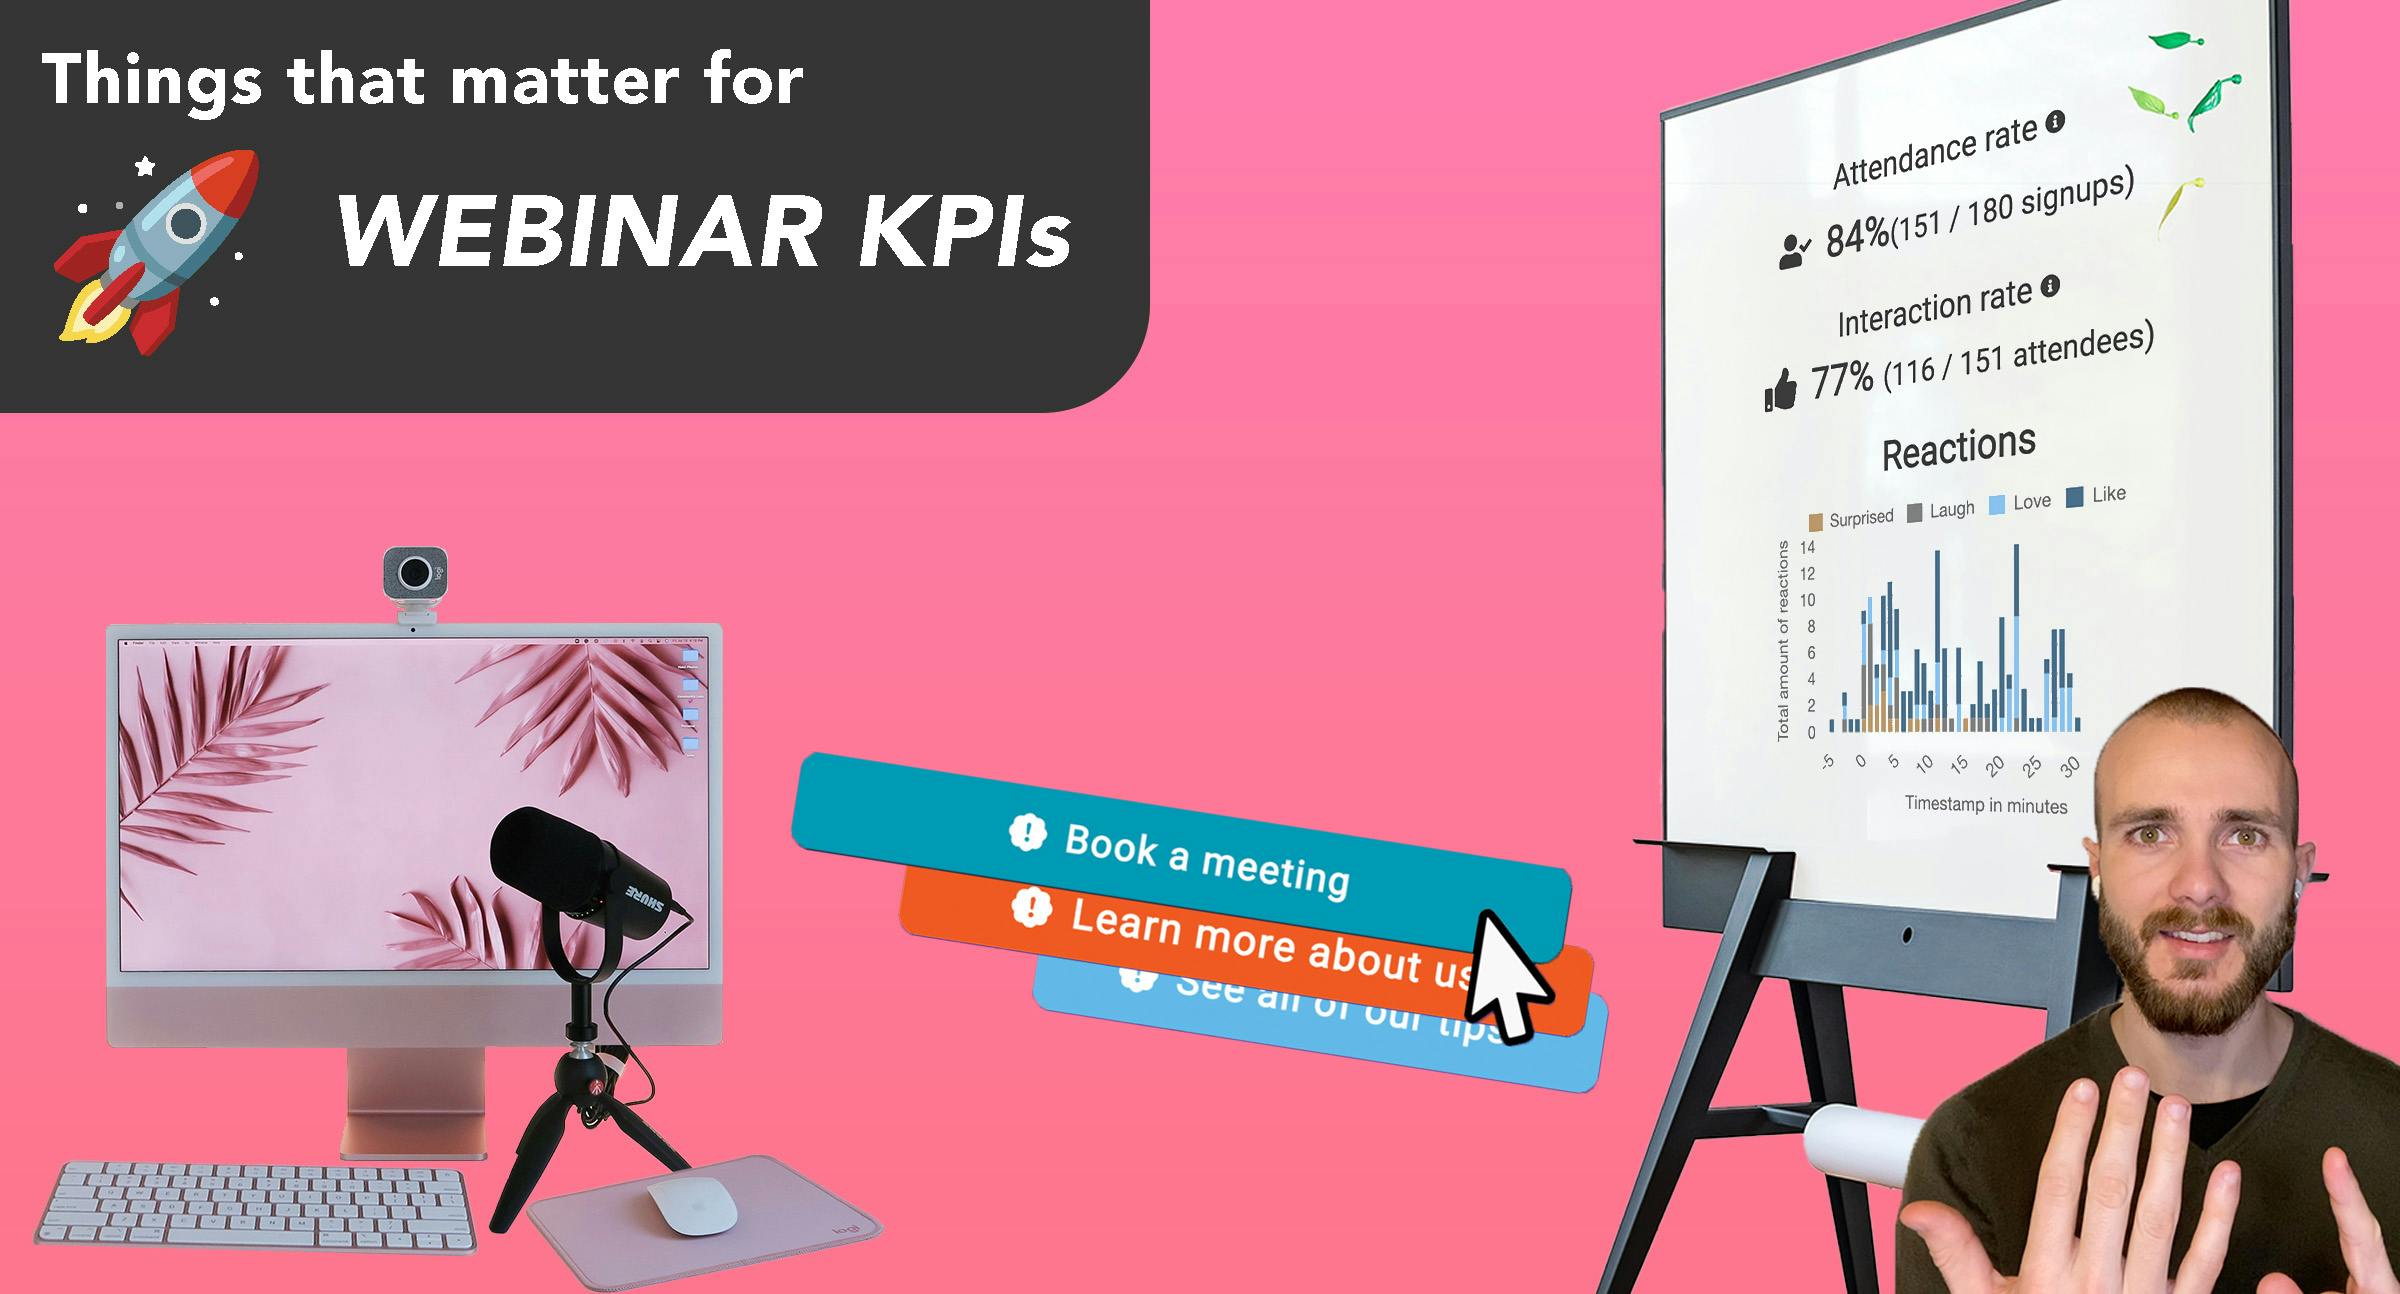 Things that matter for webinar KPIs: easy to present with the webinar software given your setup, facilitate the audience to take the next step, easy to work with data